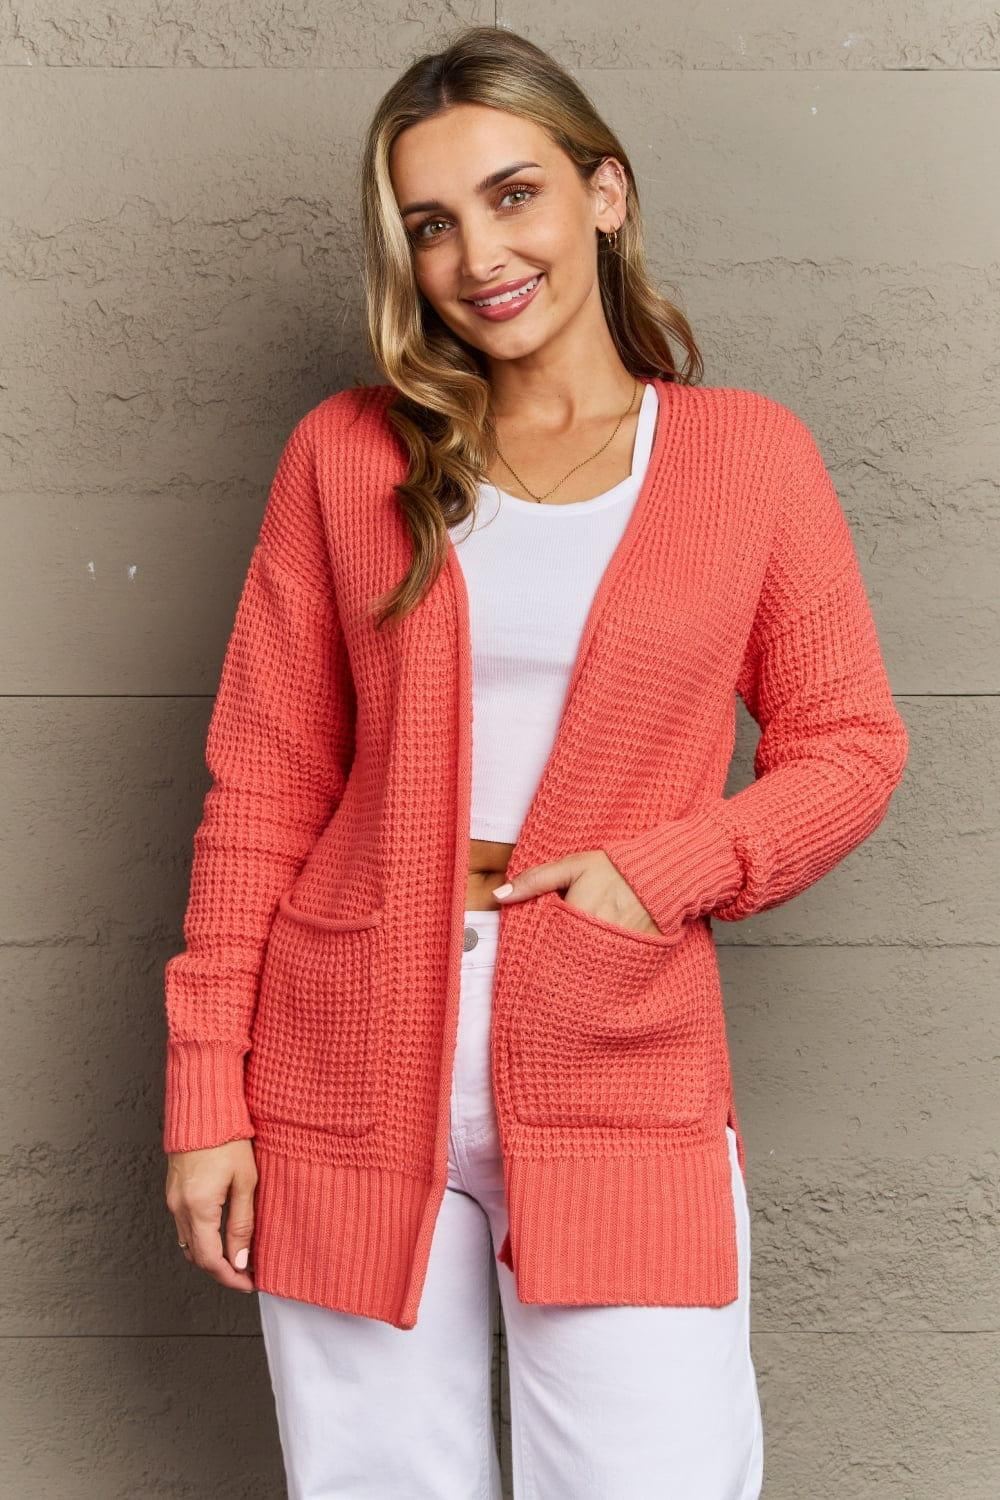 Bright & Cozy Waffle Knit Cardigan - Coral - Inspired Eye Boutique